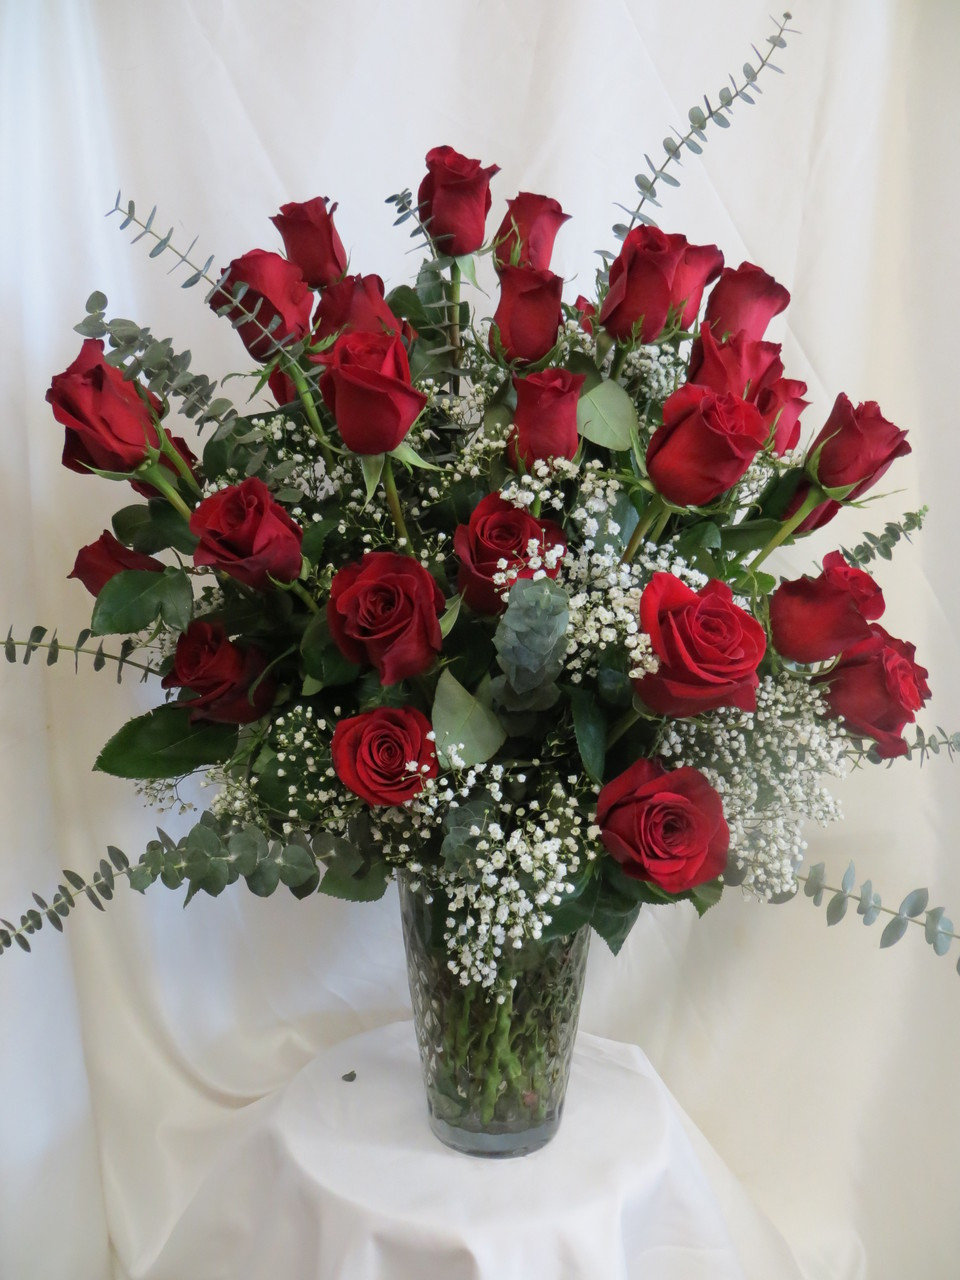 red roses bouquet vase